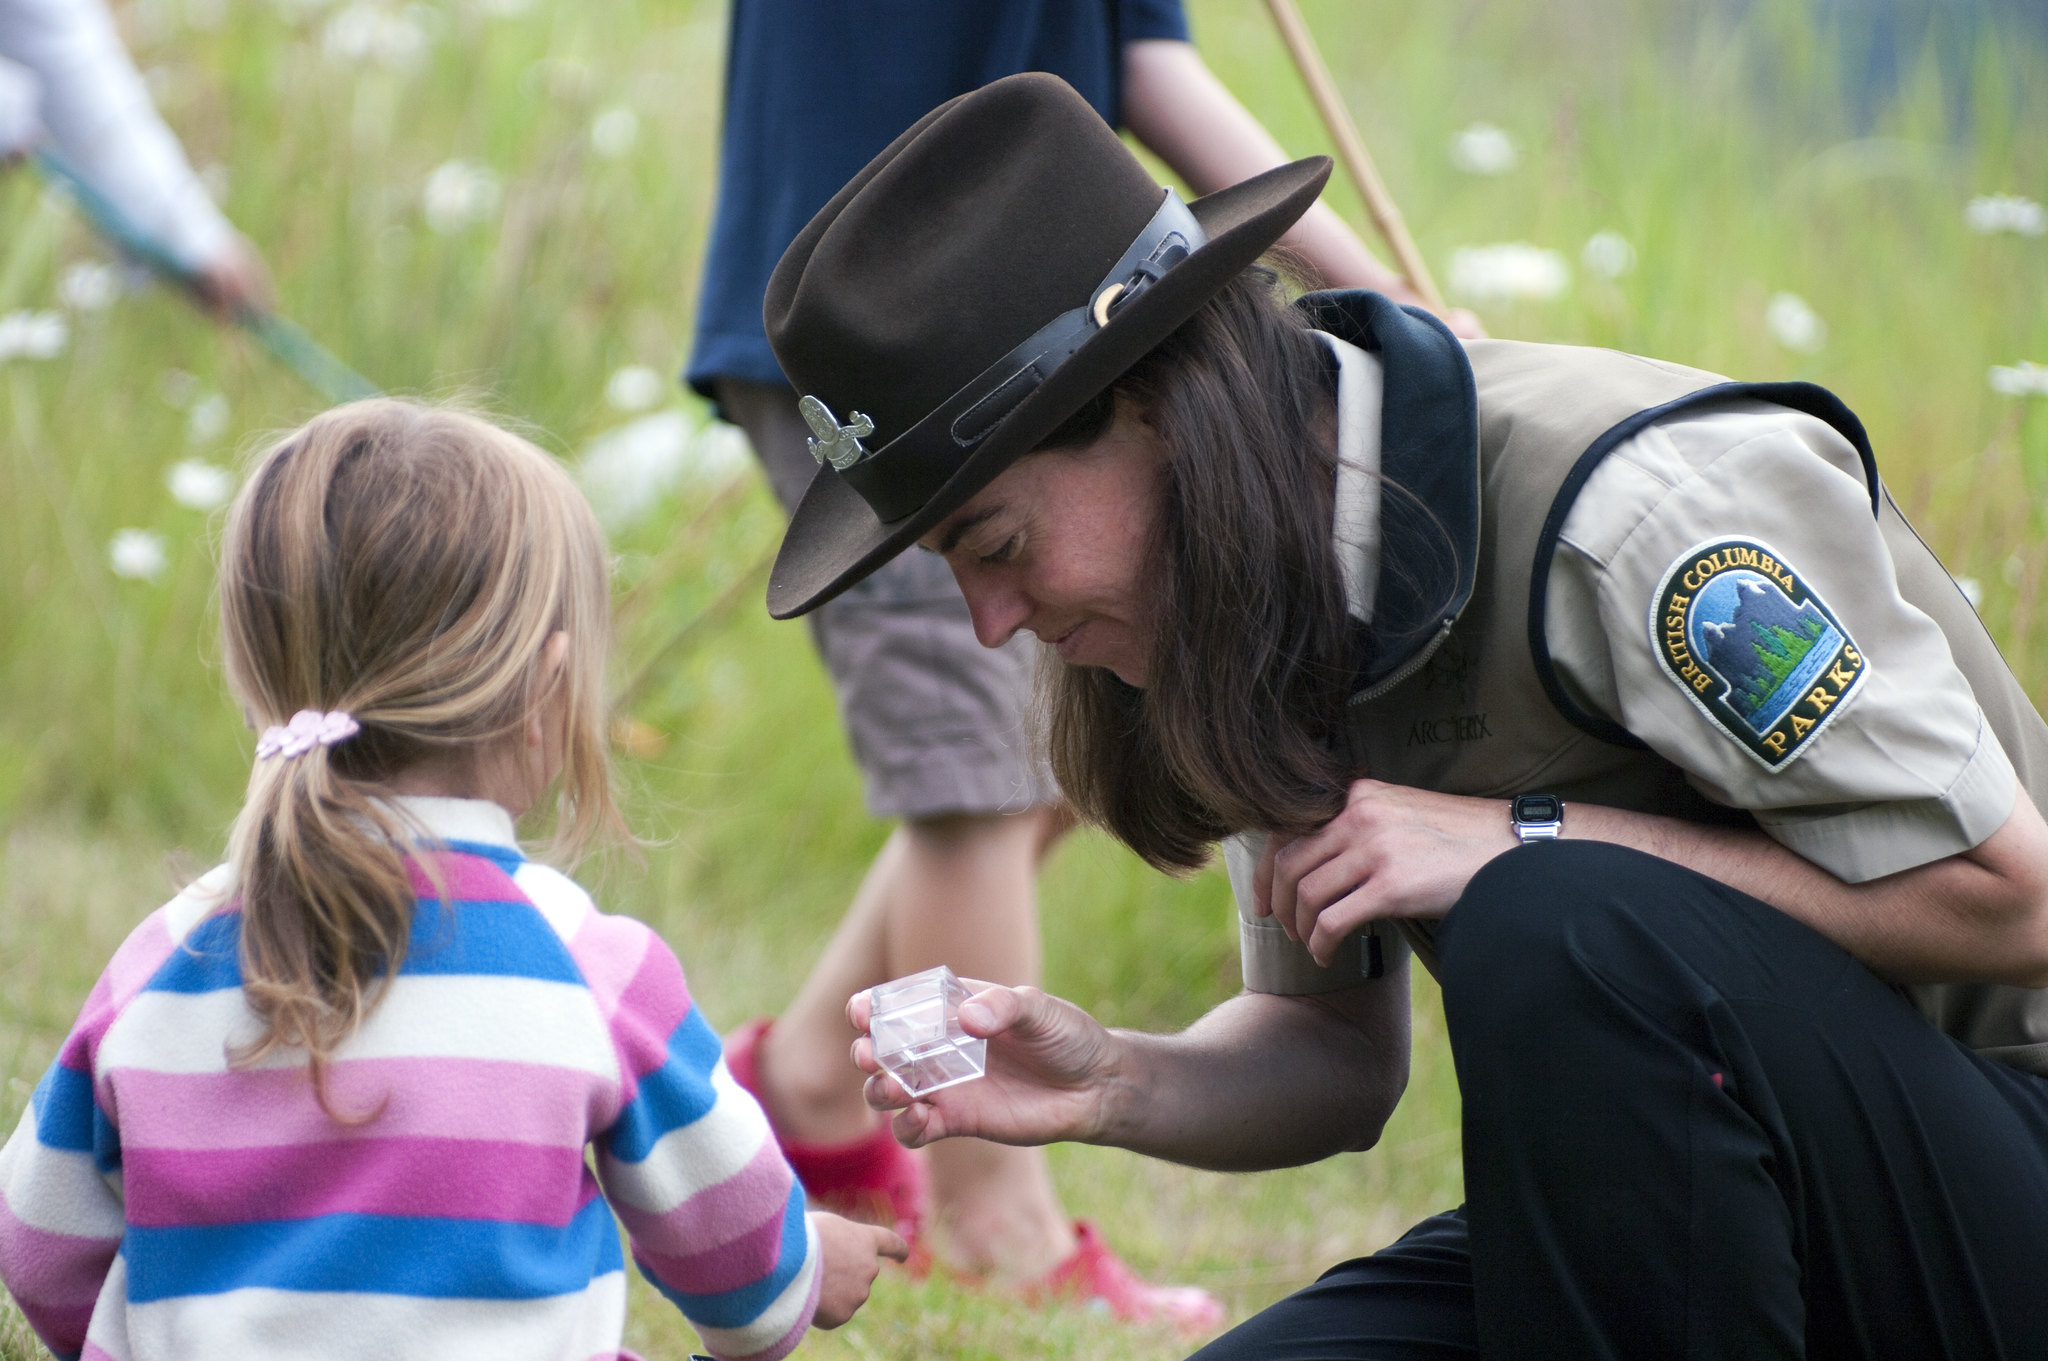 A park ranger holds out a clear plastic cube to a young girl while crouched in tall grass.